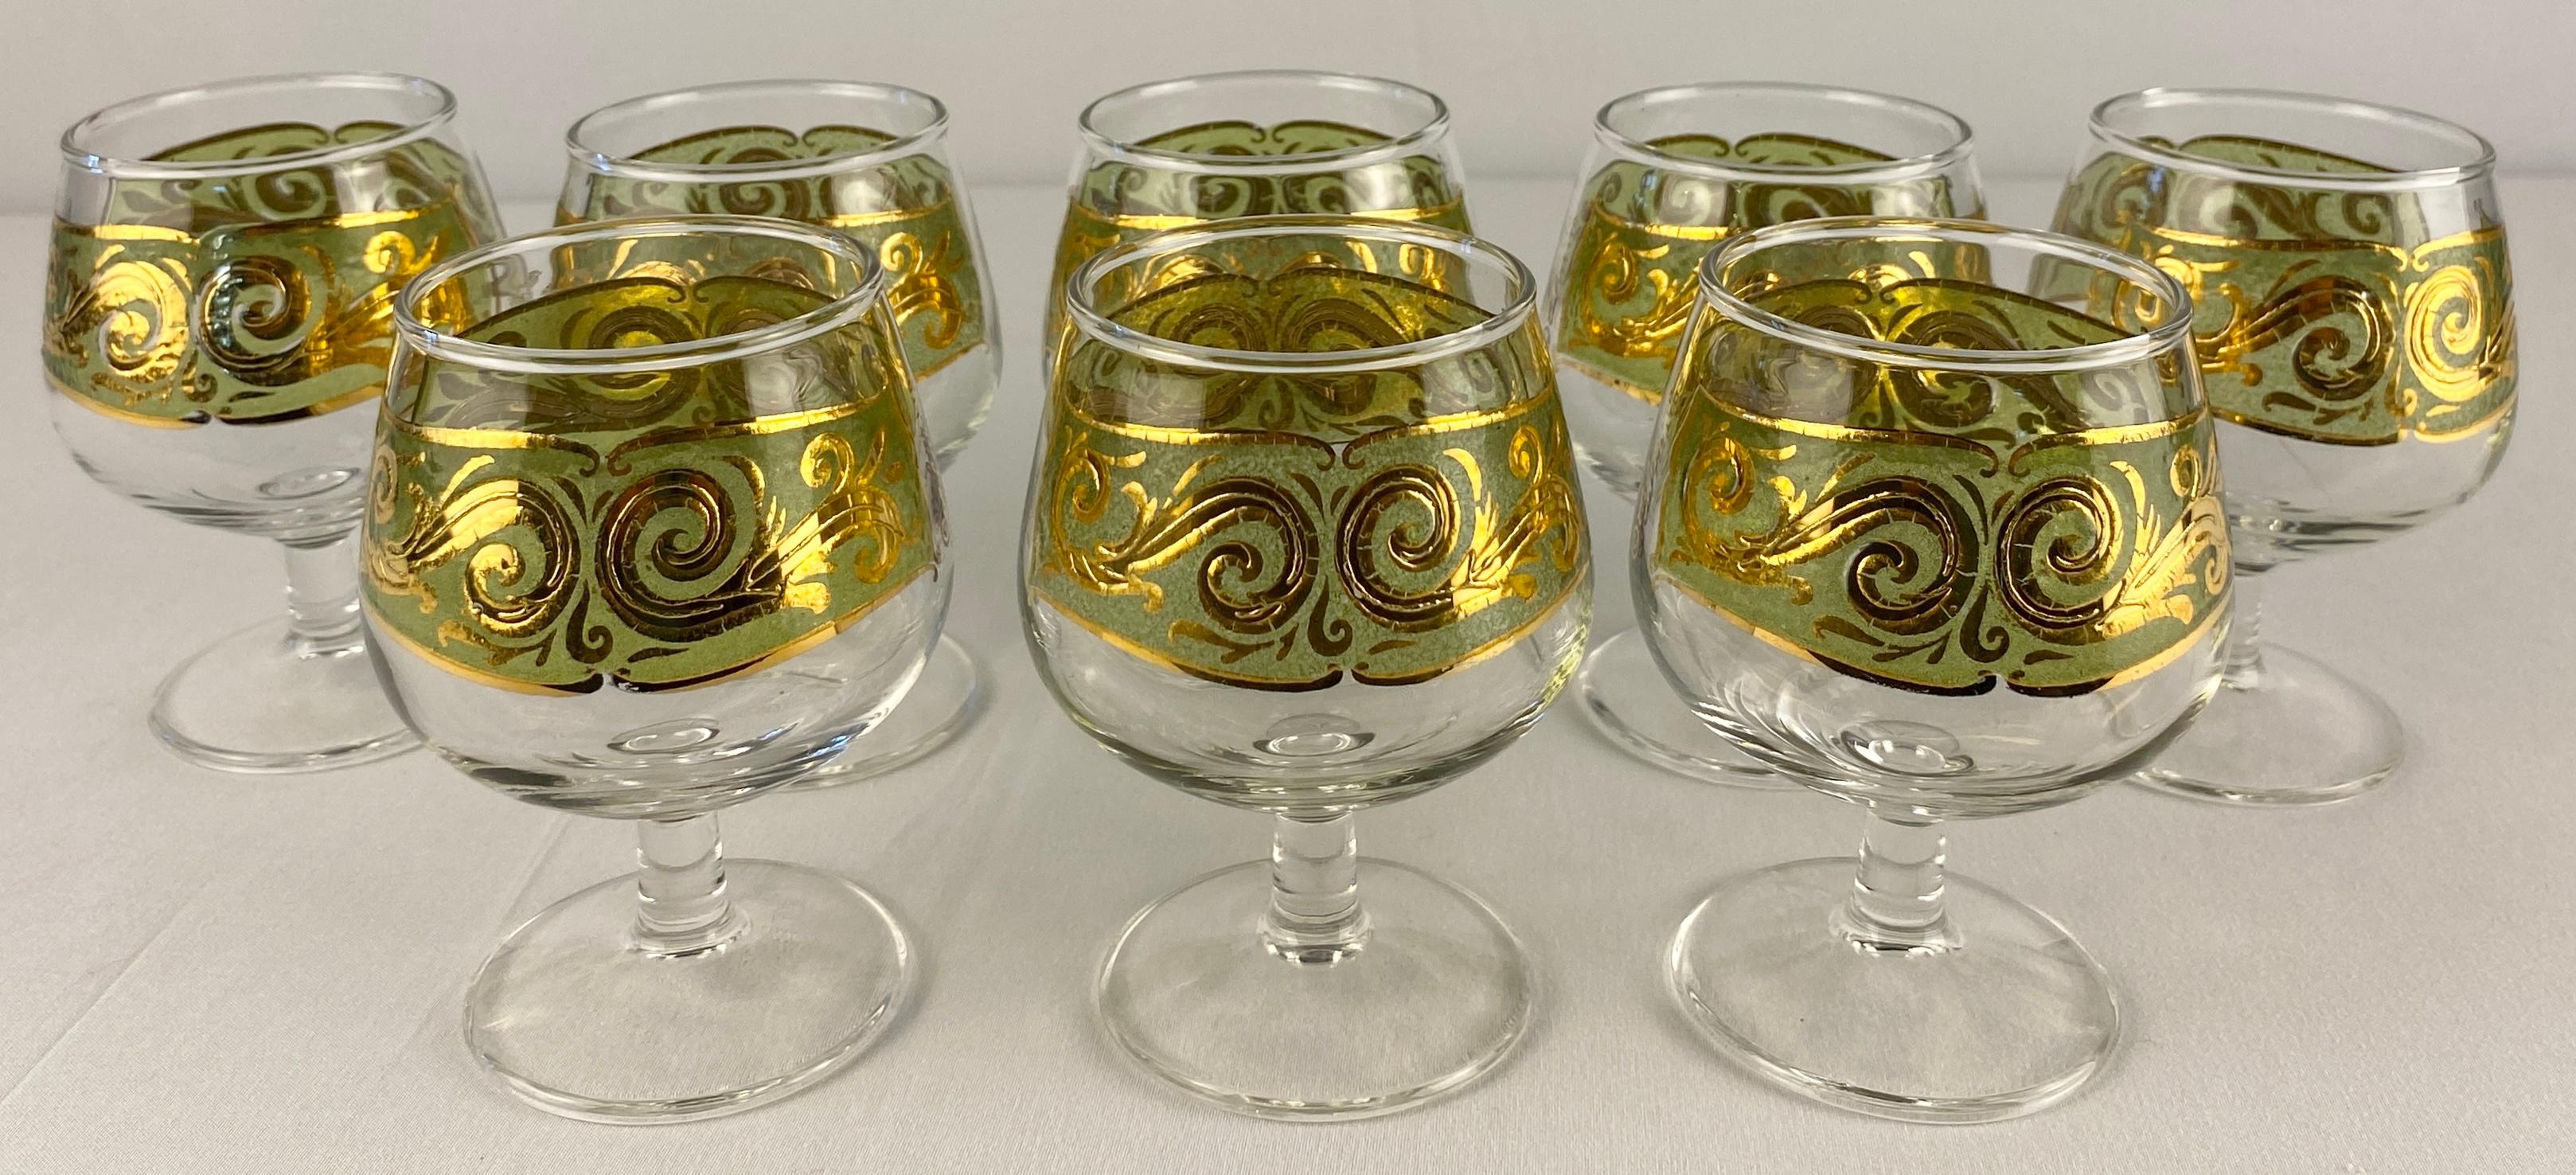 Culver Cordial Glasses Set of 8 For Sale 3